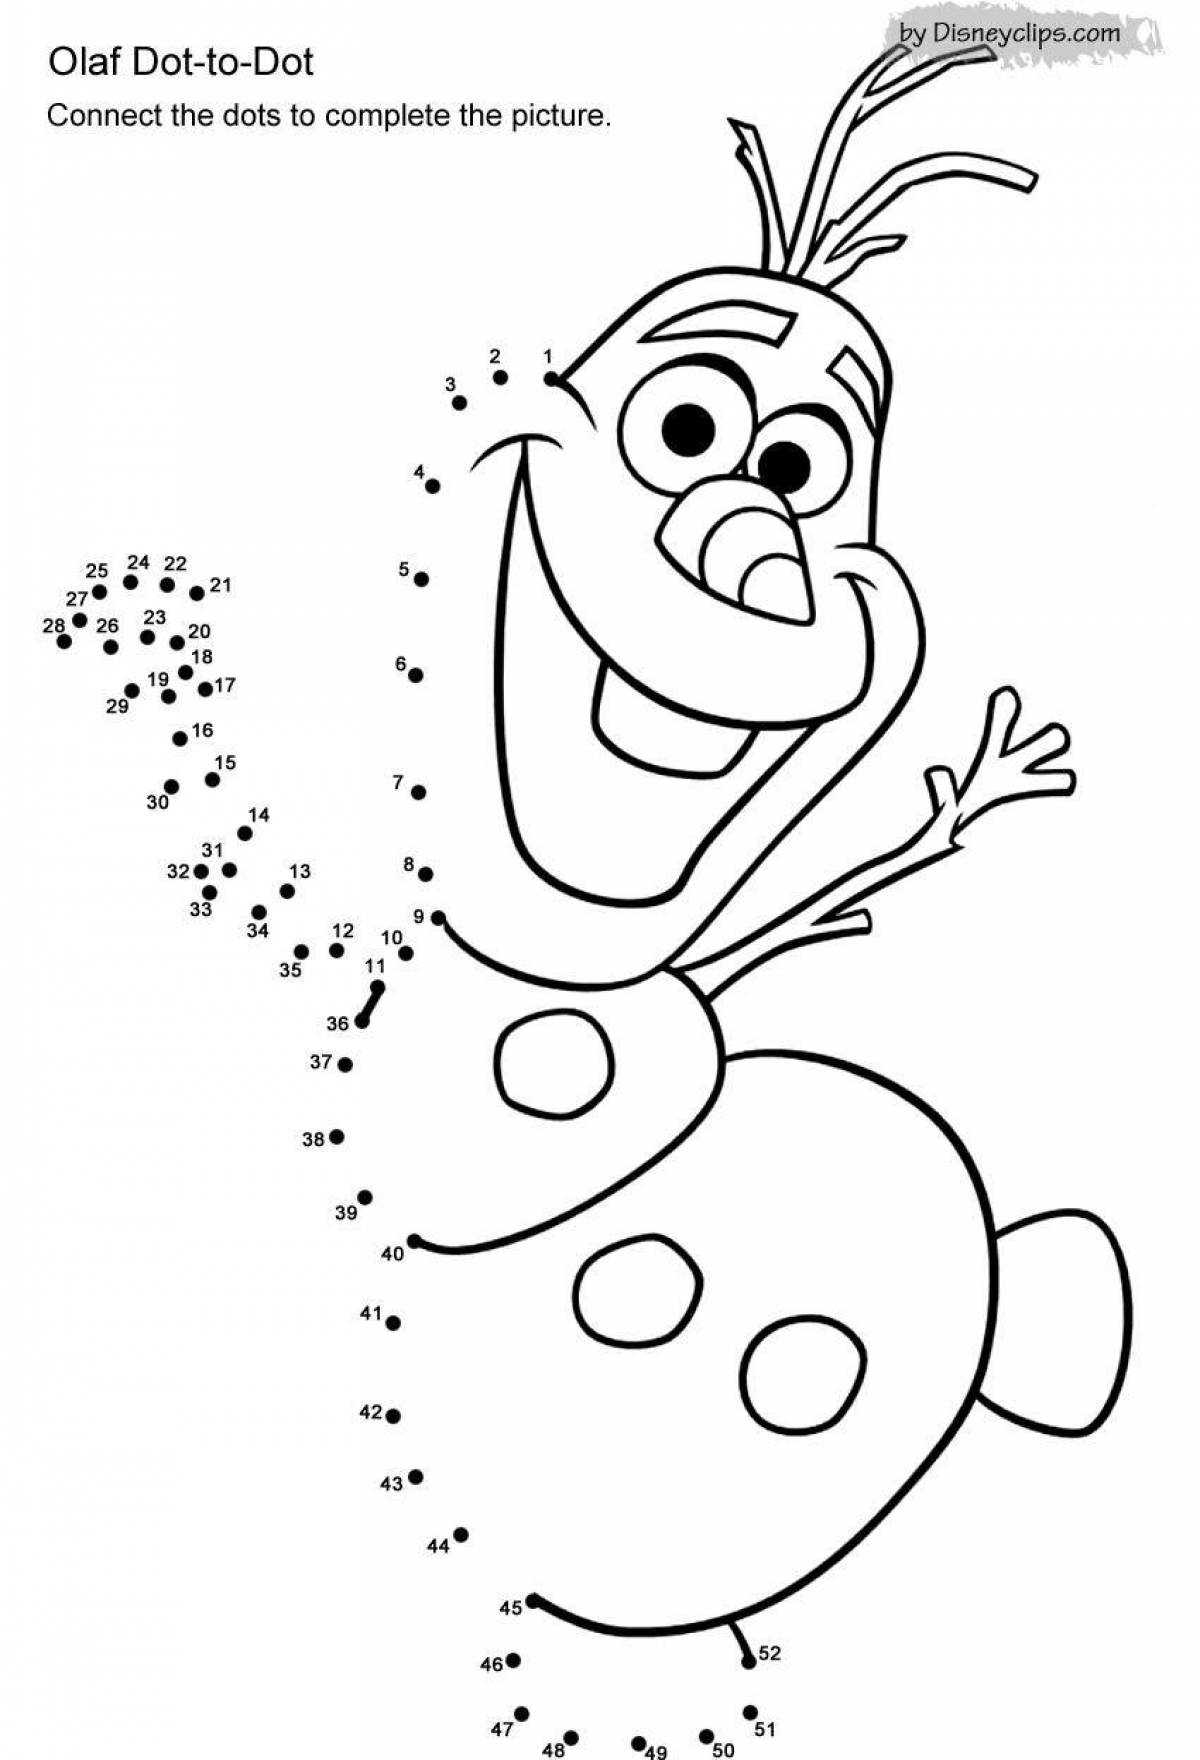 Olaf playful coloring for kids